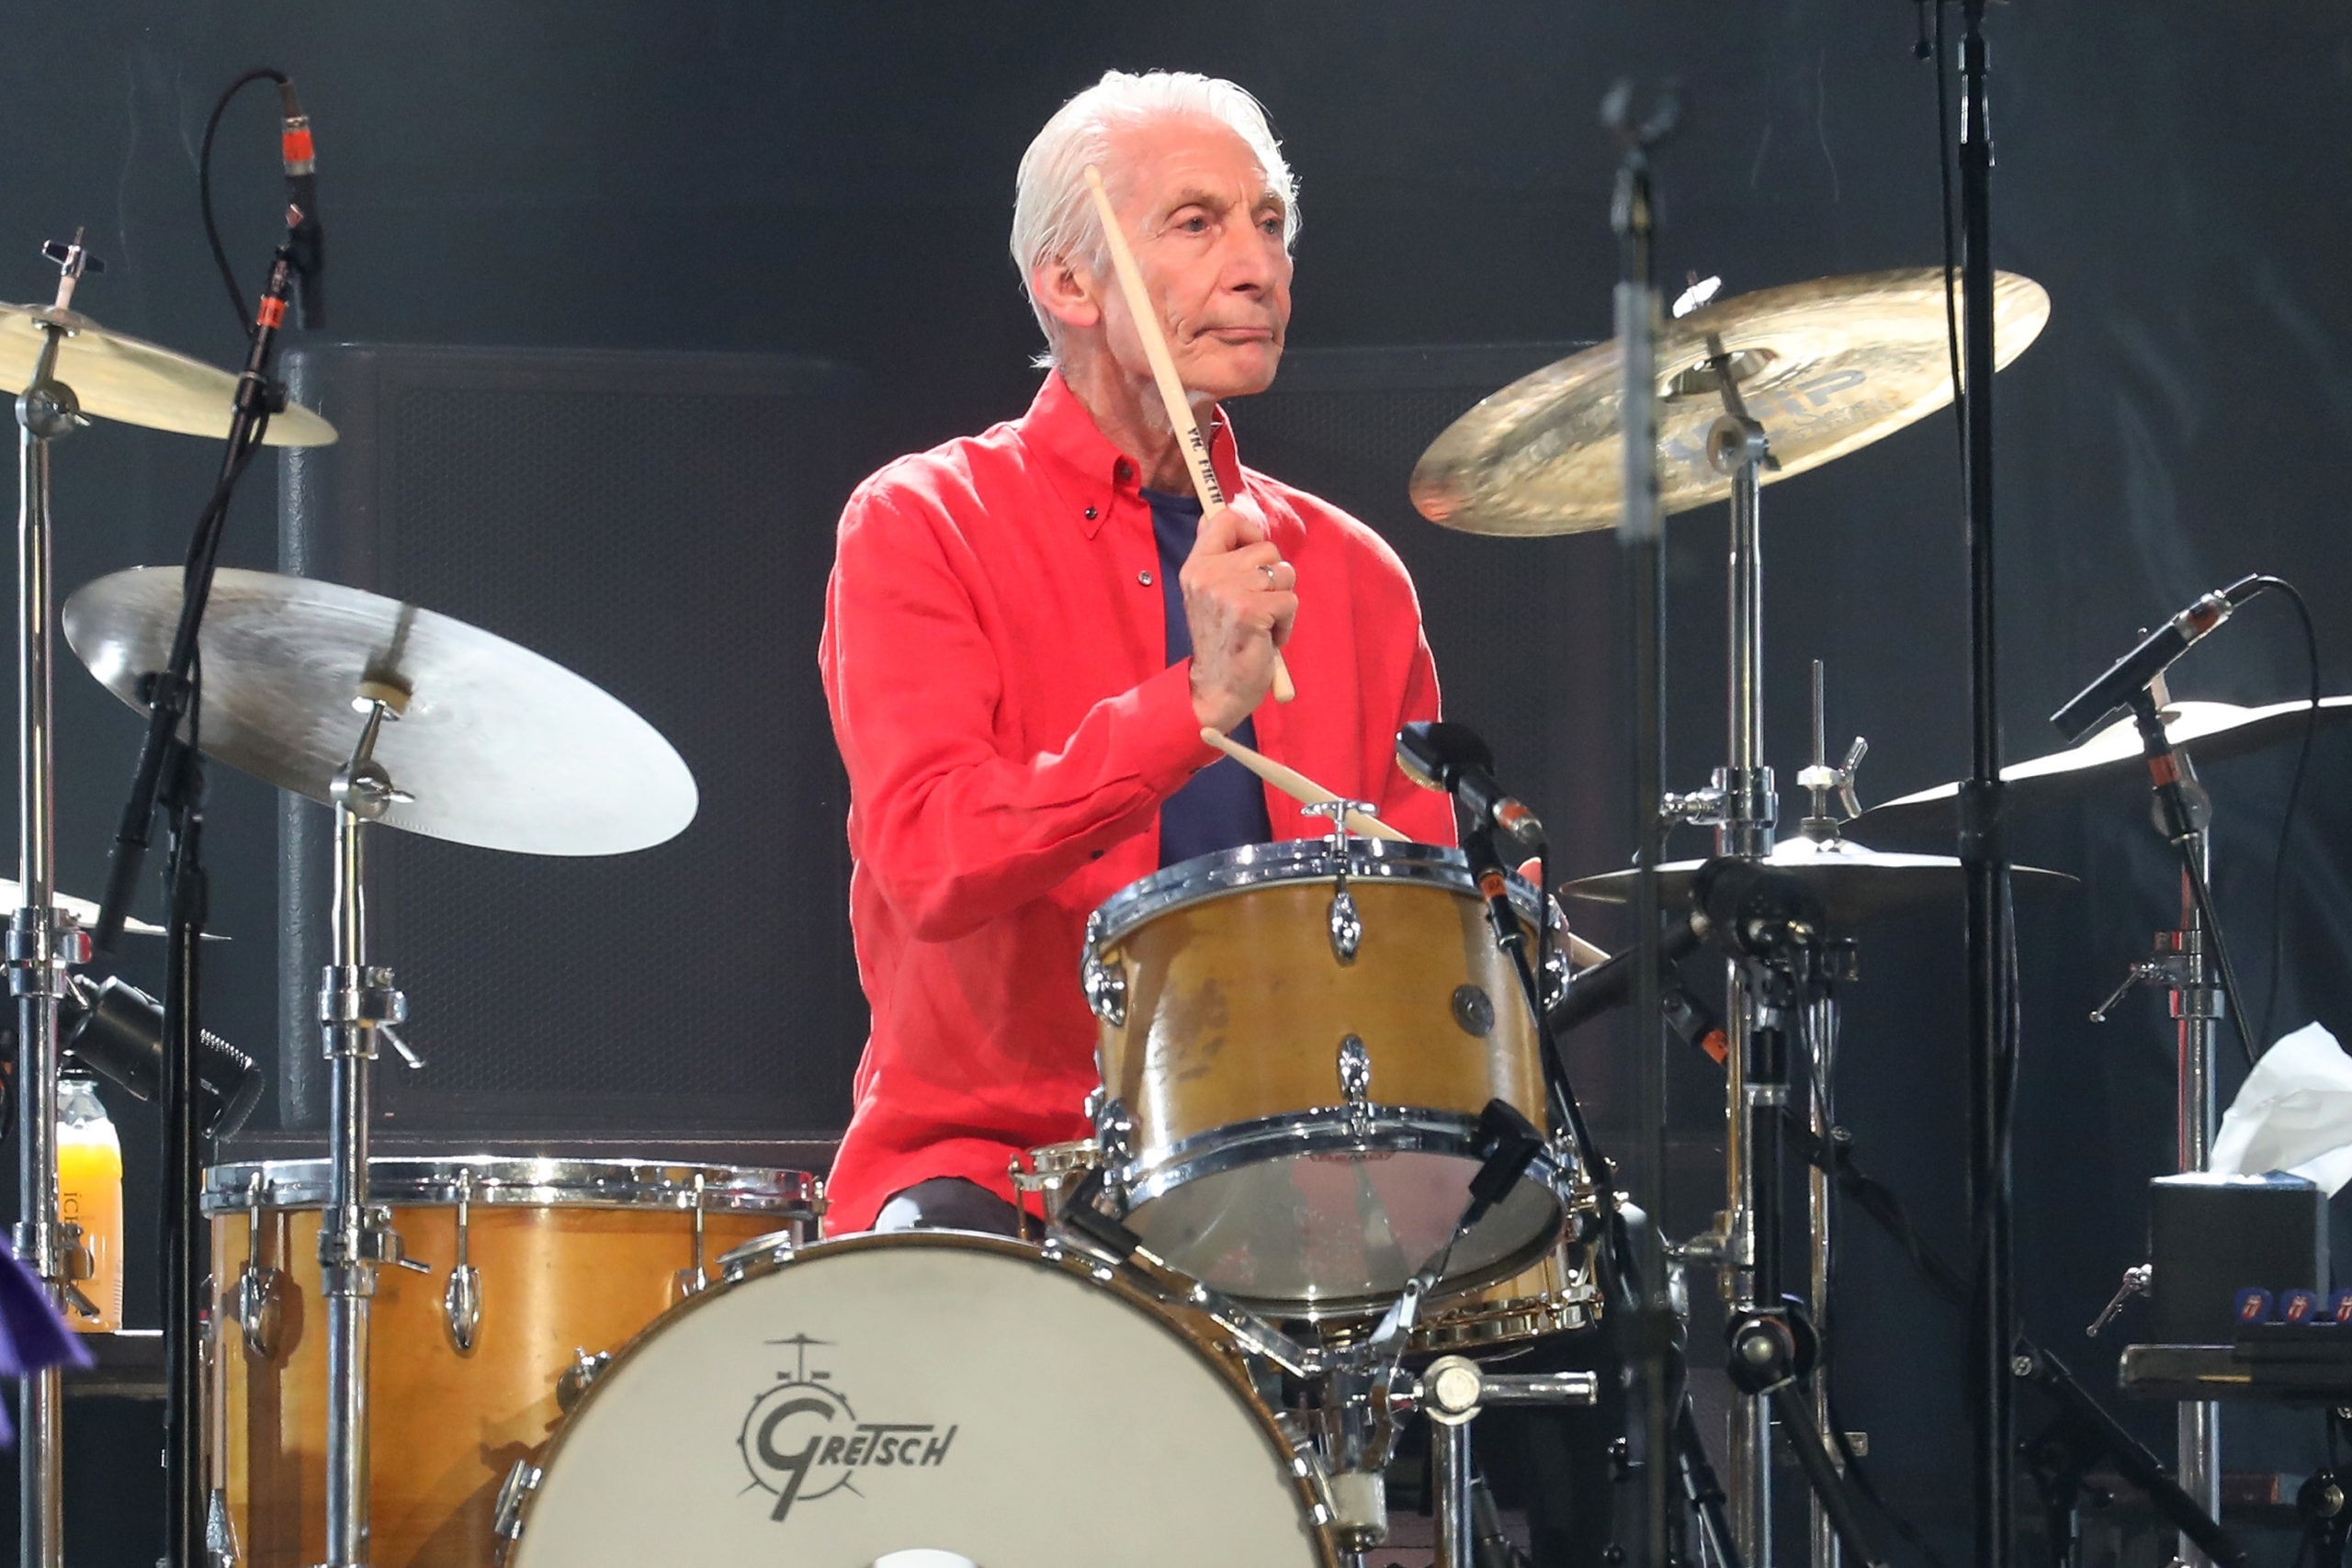 Mick Jagger Pays Tribute to Charlie Watts a Year After His Death